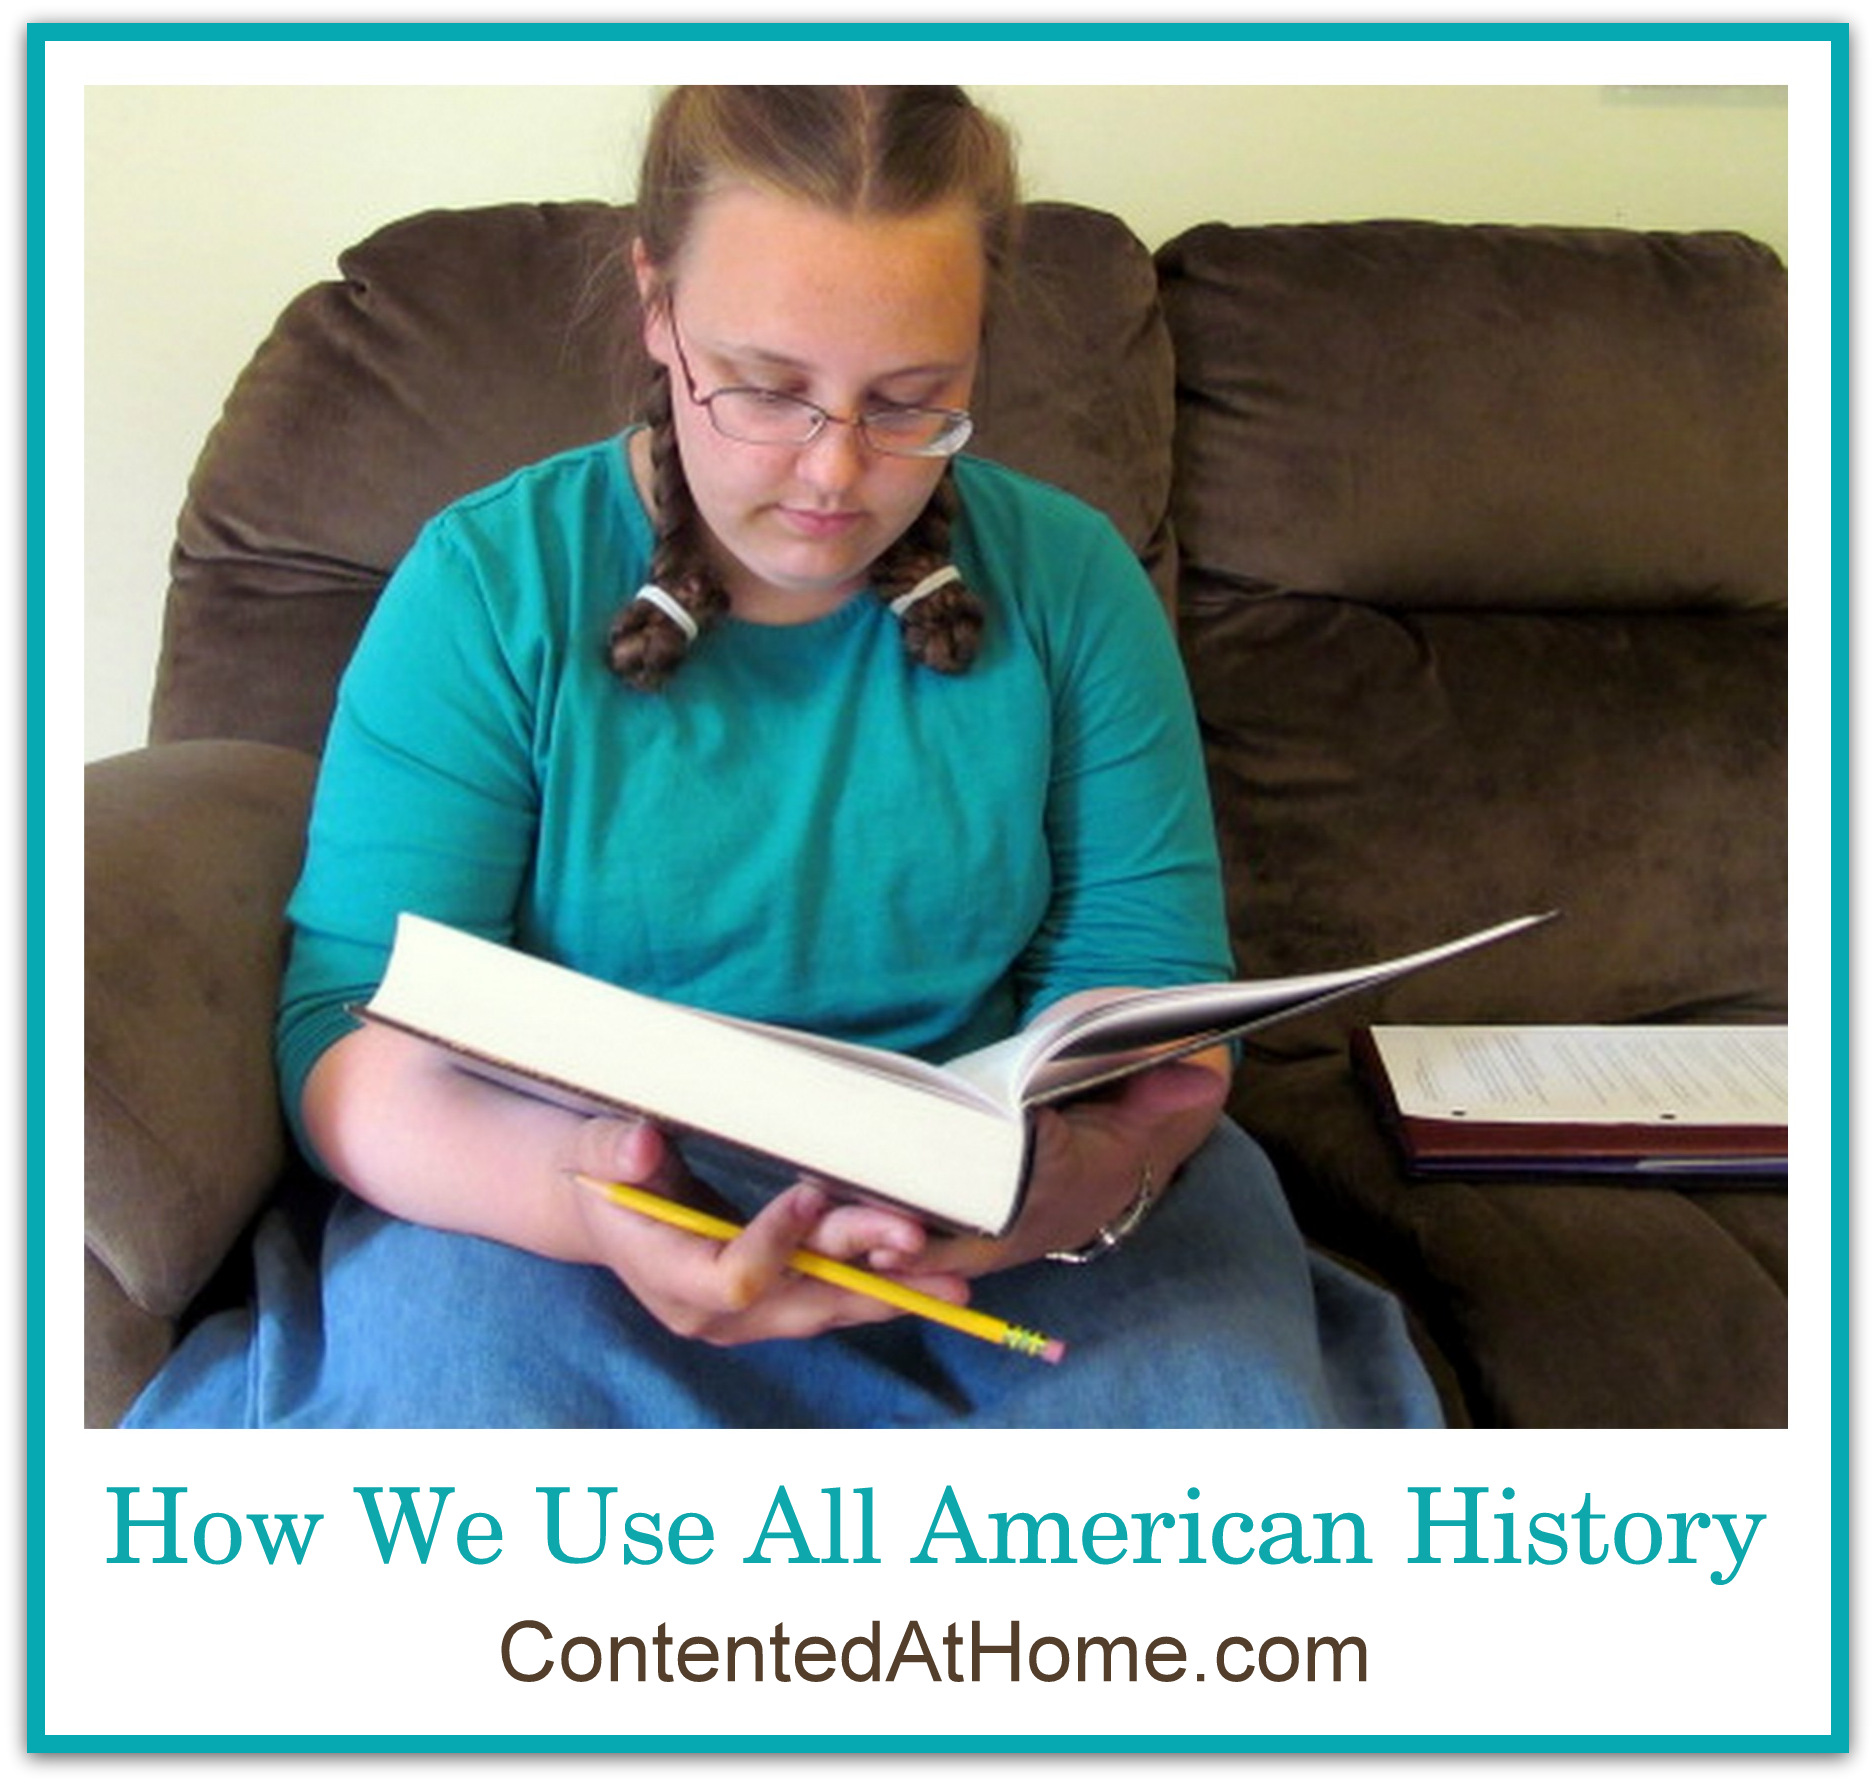 How We Use All American History